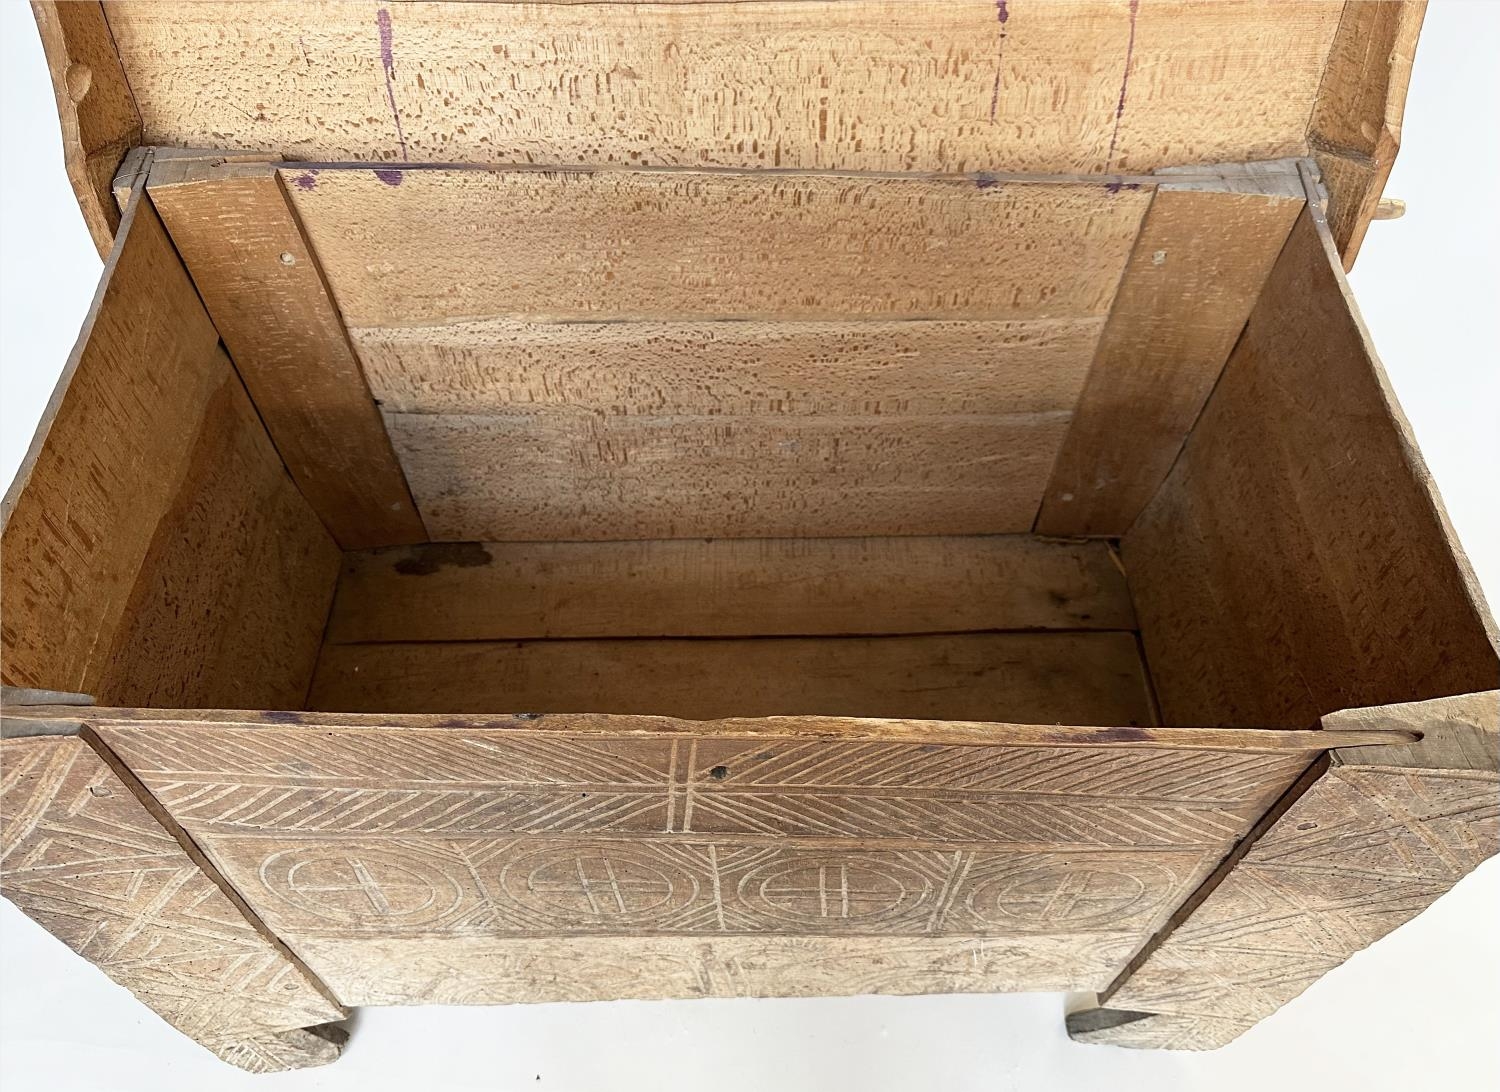 SCANDINAVIAN KISTA TRUNK, early 18th century sycamore of pegged construction with chip decorated - Image 6 of 12